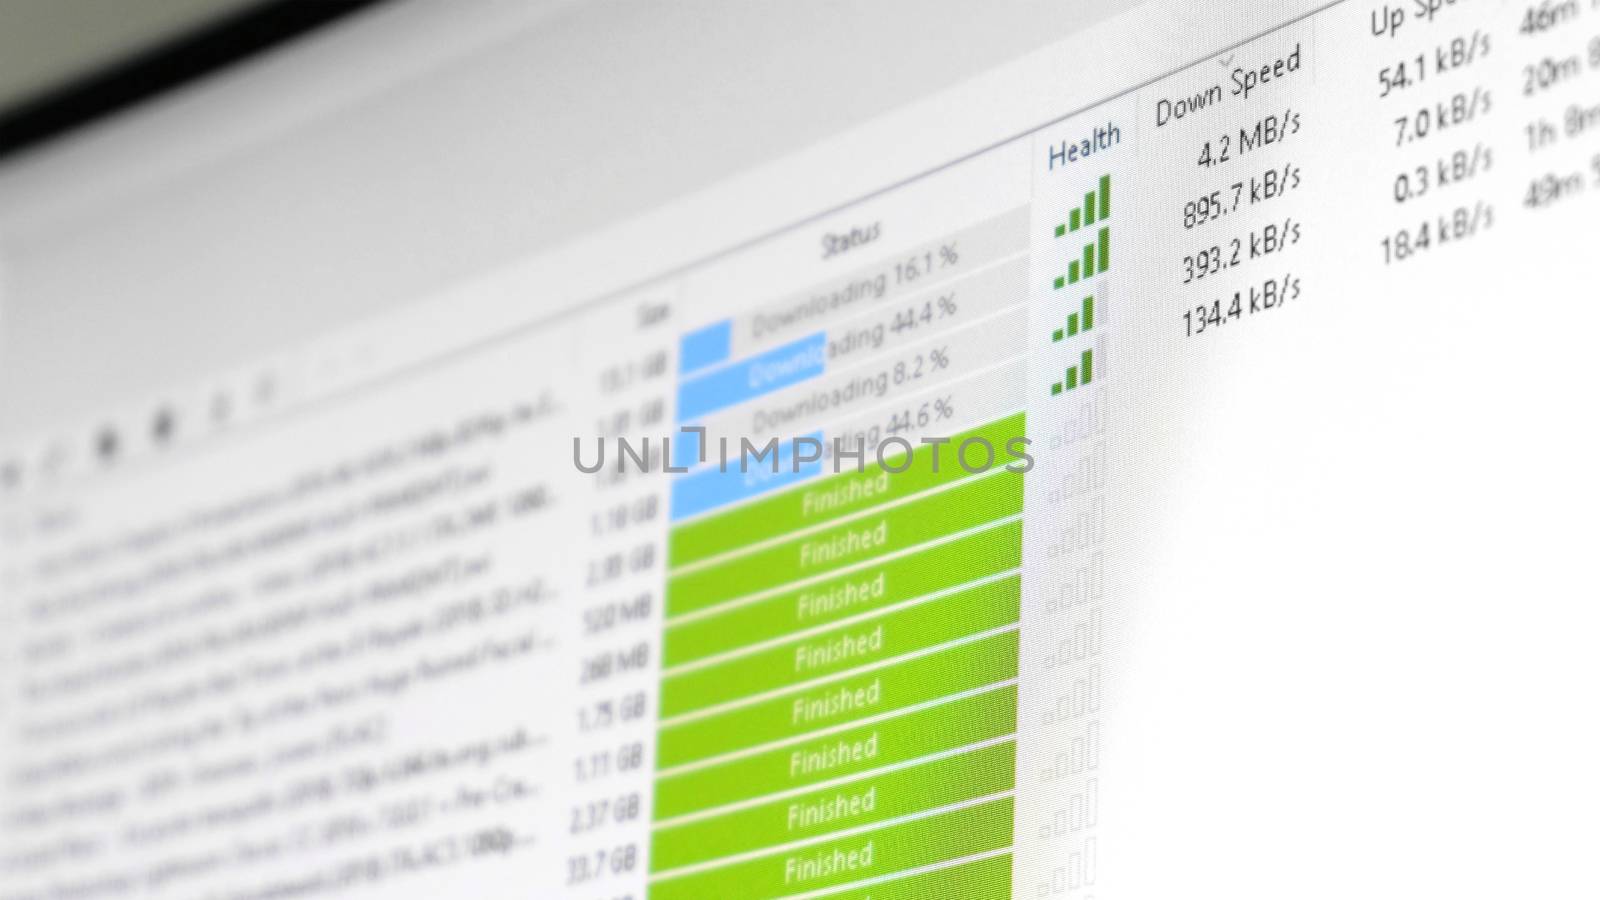 torrent download speed - software client is downloading multiple files .